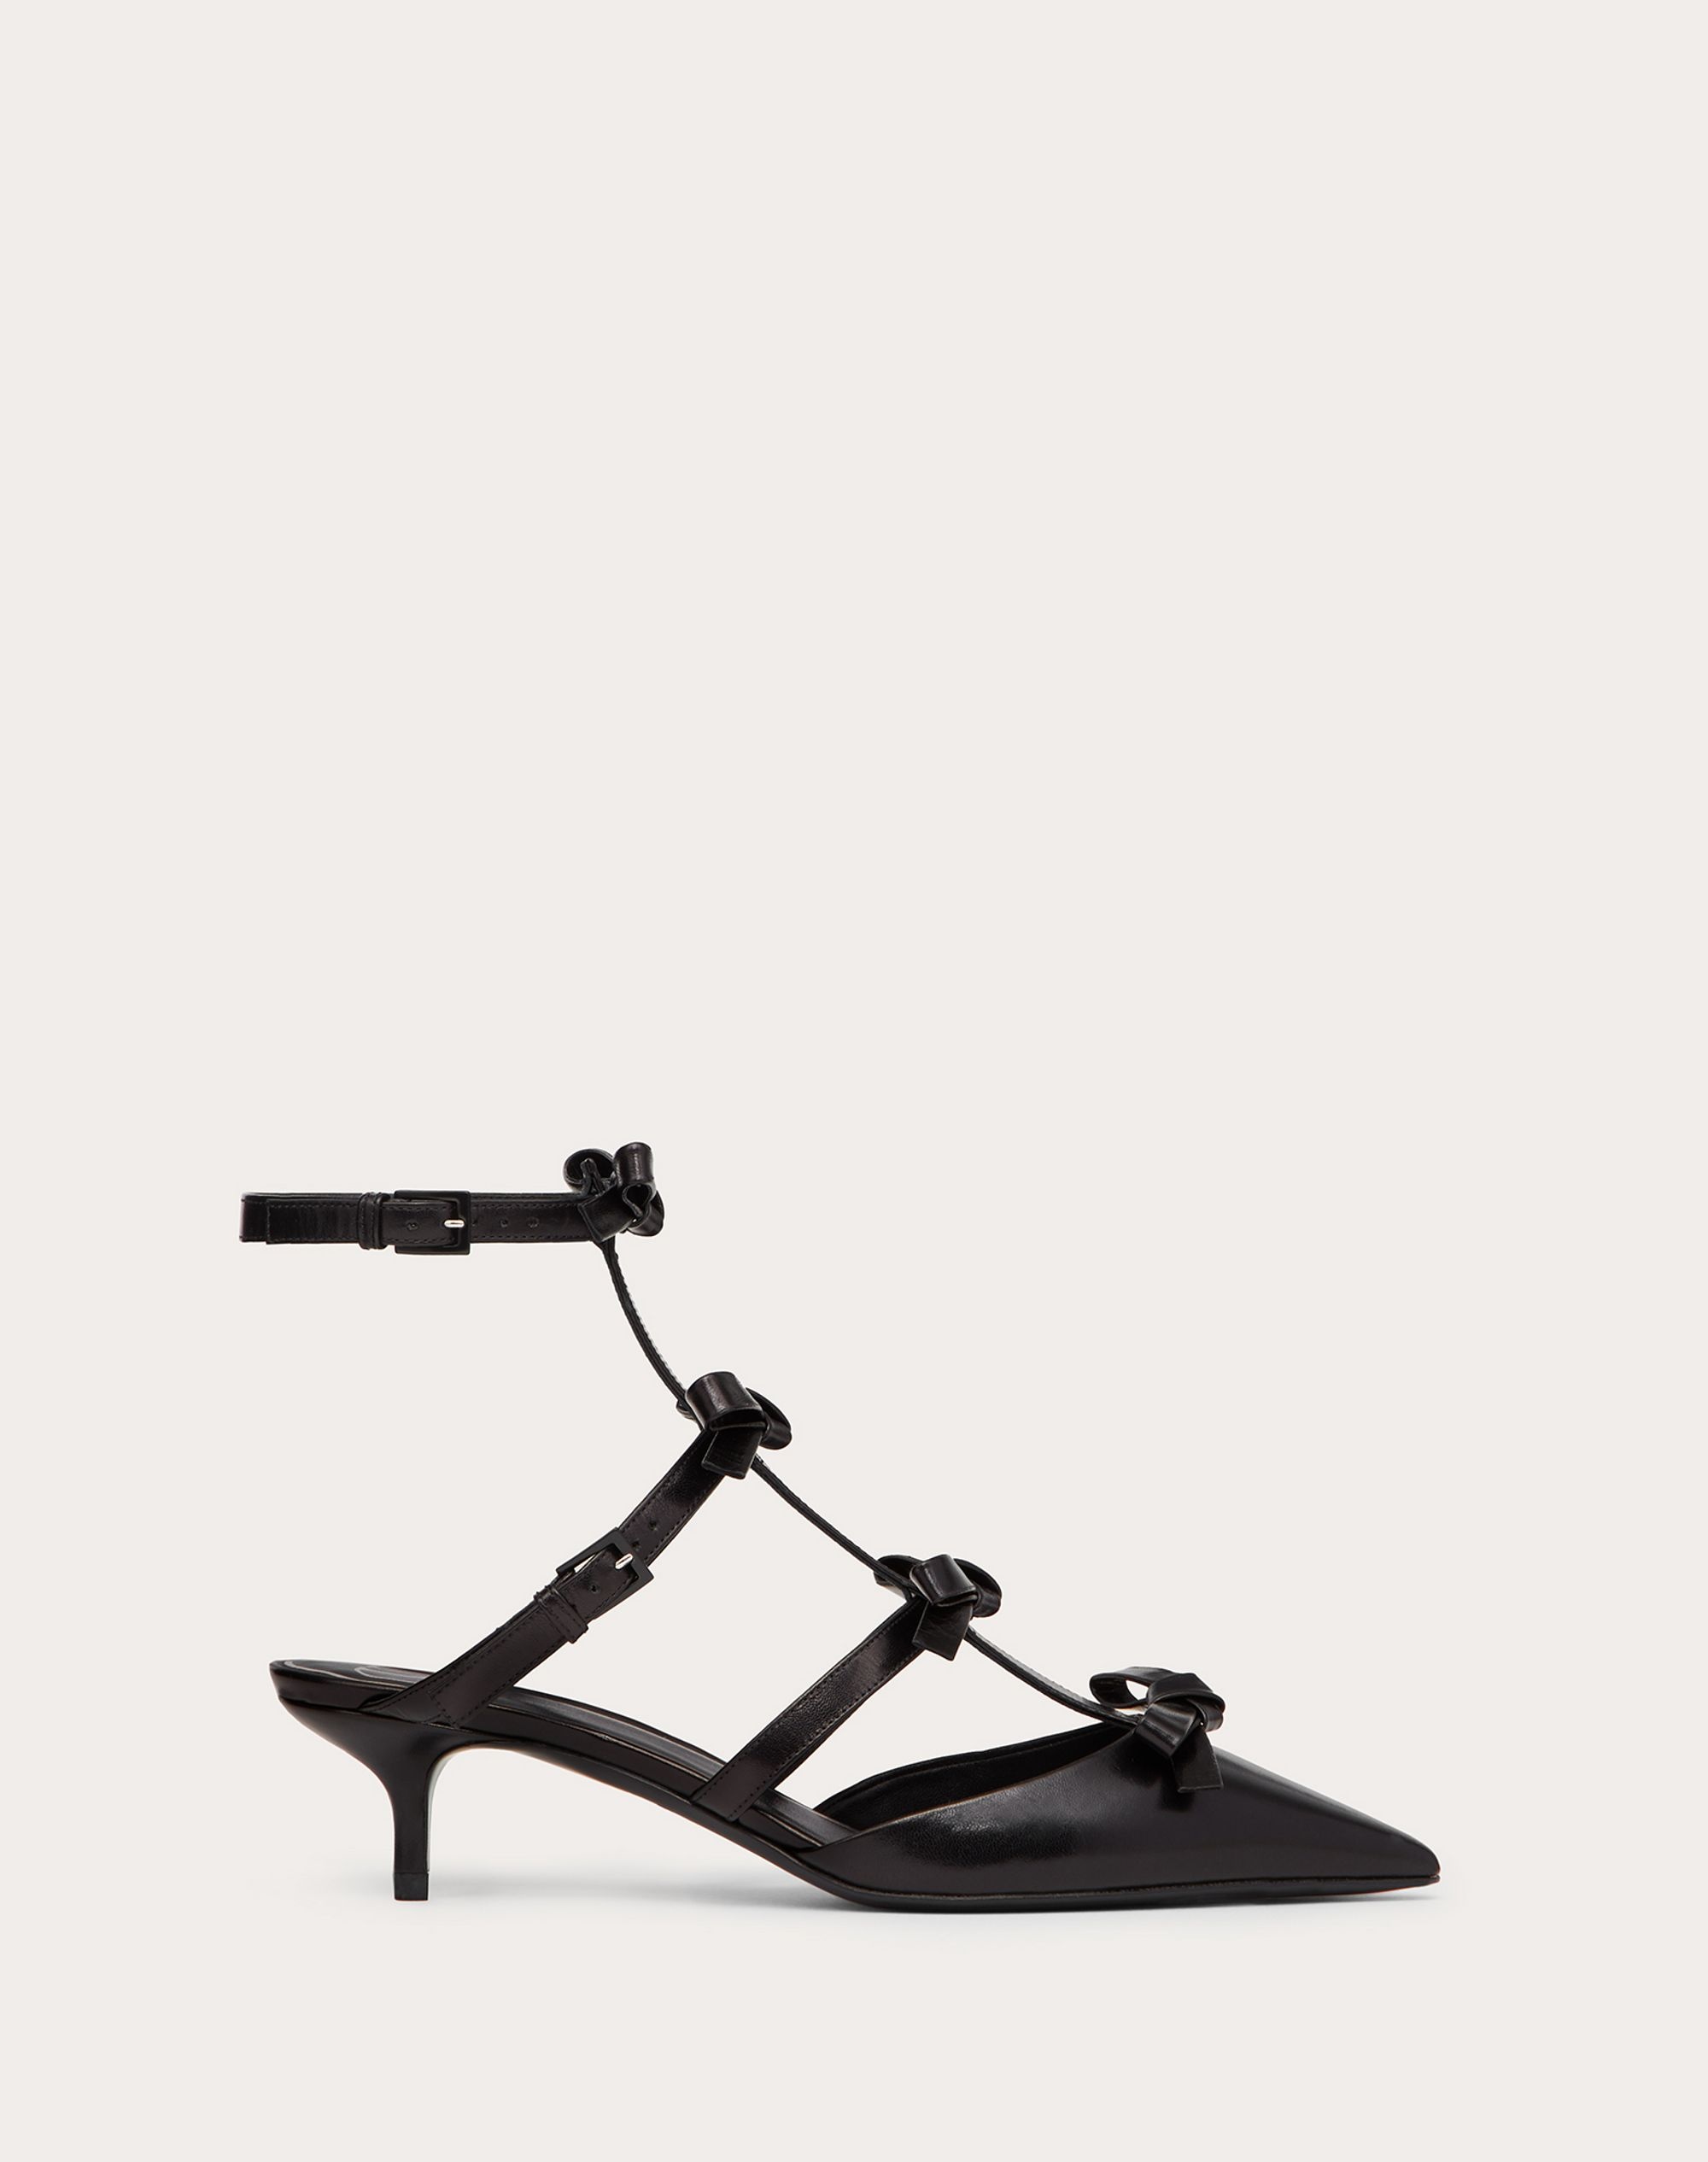 ANKLE STRAP PUMP WITH KIDSKIN FRENCH BOWS  40 MM - 1